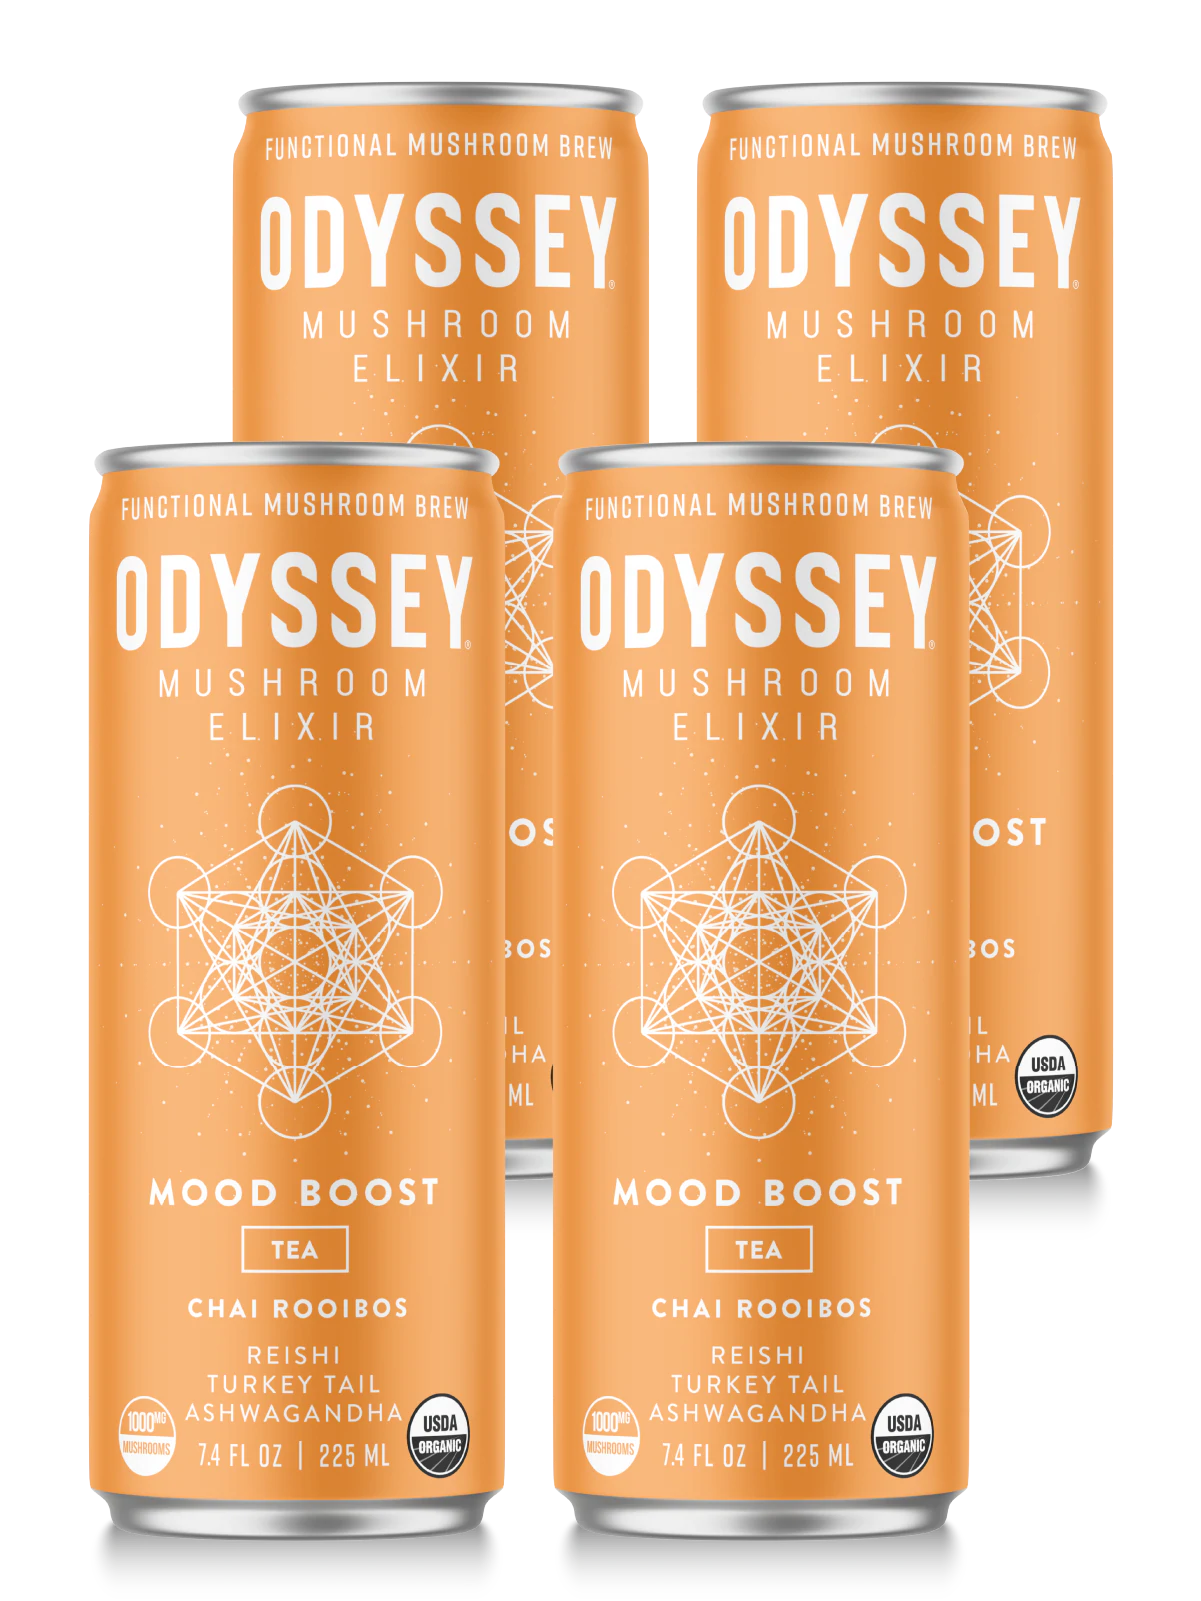 ODYSSEY ELIXIR MOOD BOOST Functional Mushroom Cold Brew Tea 7.4oz yoga smokes smoke shop, dispensary, local dispensary, smokeshop near me, port st lucie smoke shop, smoke shop in port st lucie, smoke shop in port saint lucie, smoke shop in florida, Yoga Smokes Mood Boost / 4 Pack Buy RAW Rolling Papers USA, smoke shop near me, what time does the smoke shop close, smoke shop open near me, 24 hour smoke shop near me